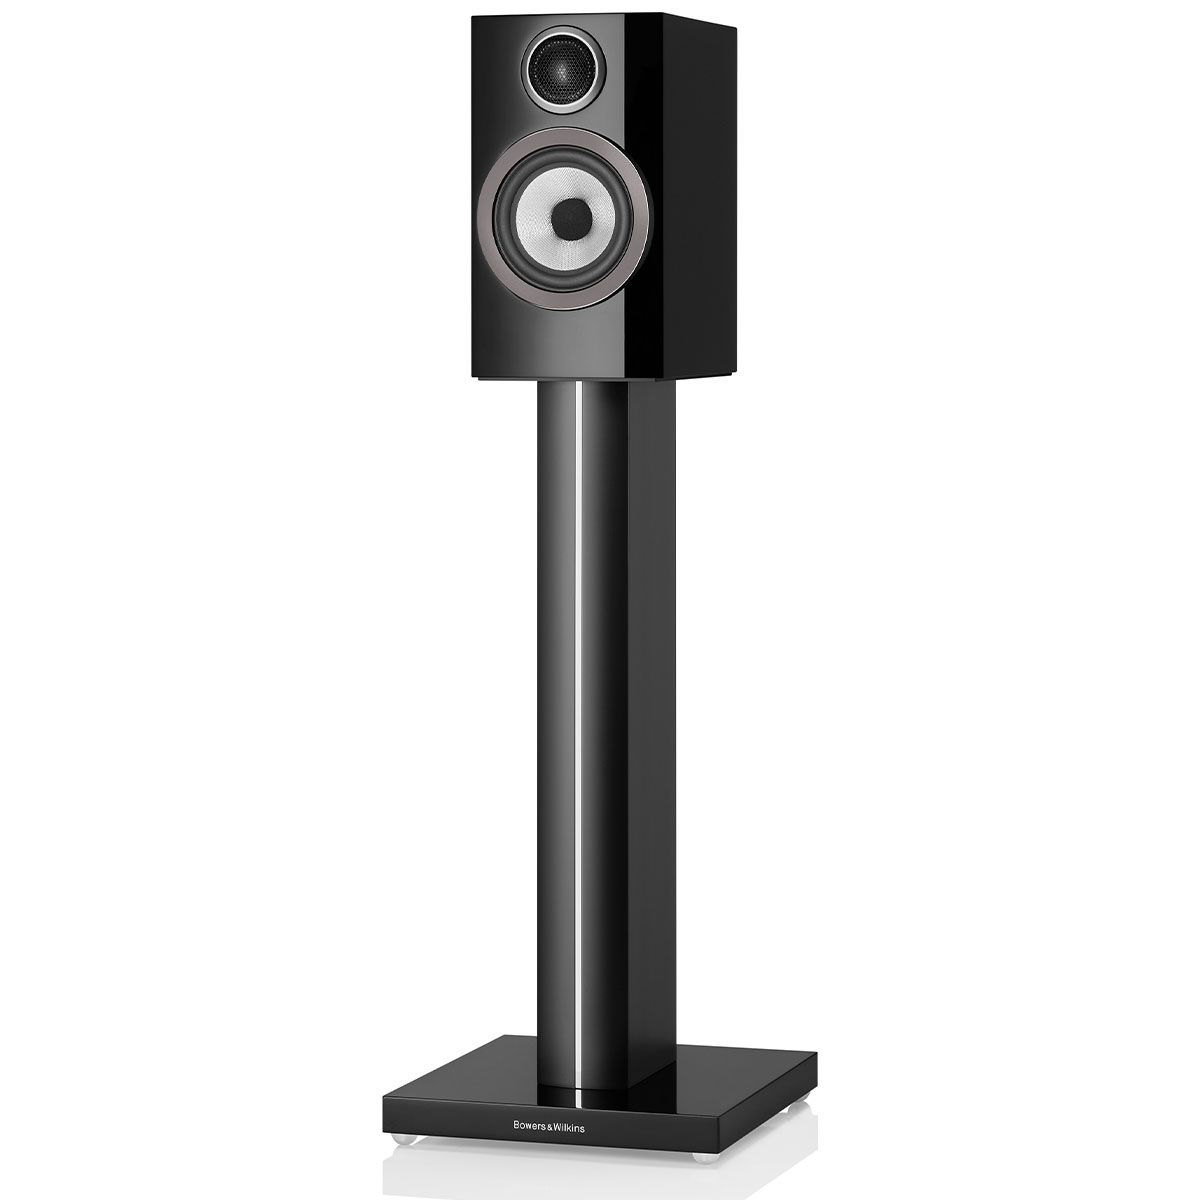 Bowers & Wilkins 707 S3 2-Way Stand Mount Bookshelf Loudspeakers - Gloss Black - on stand at an angle